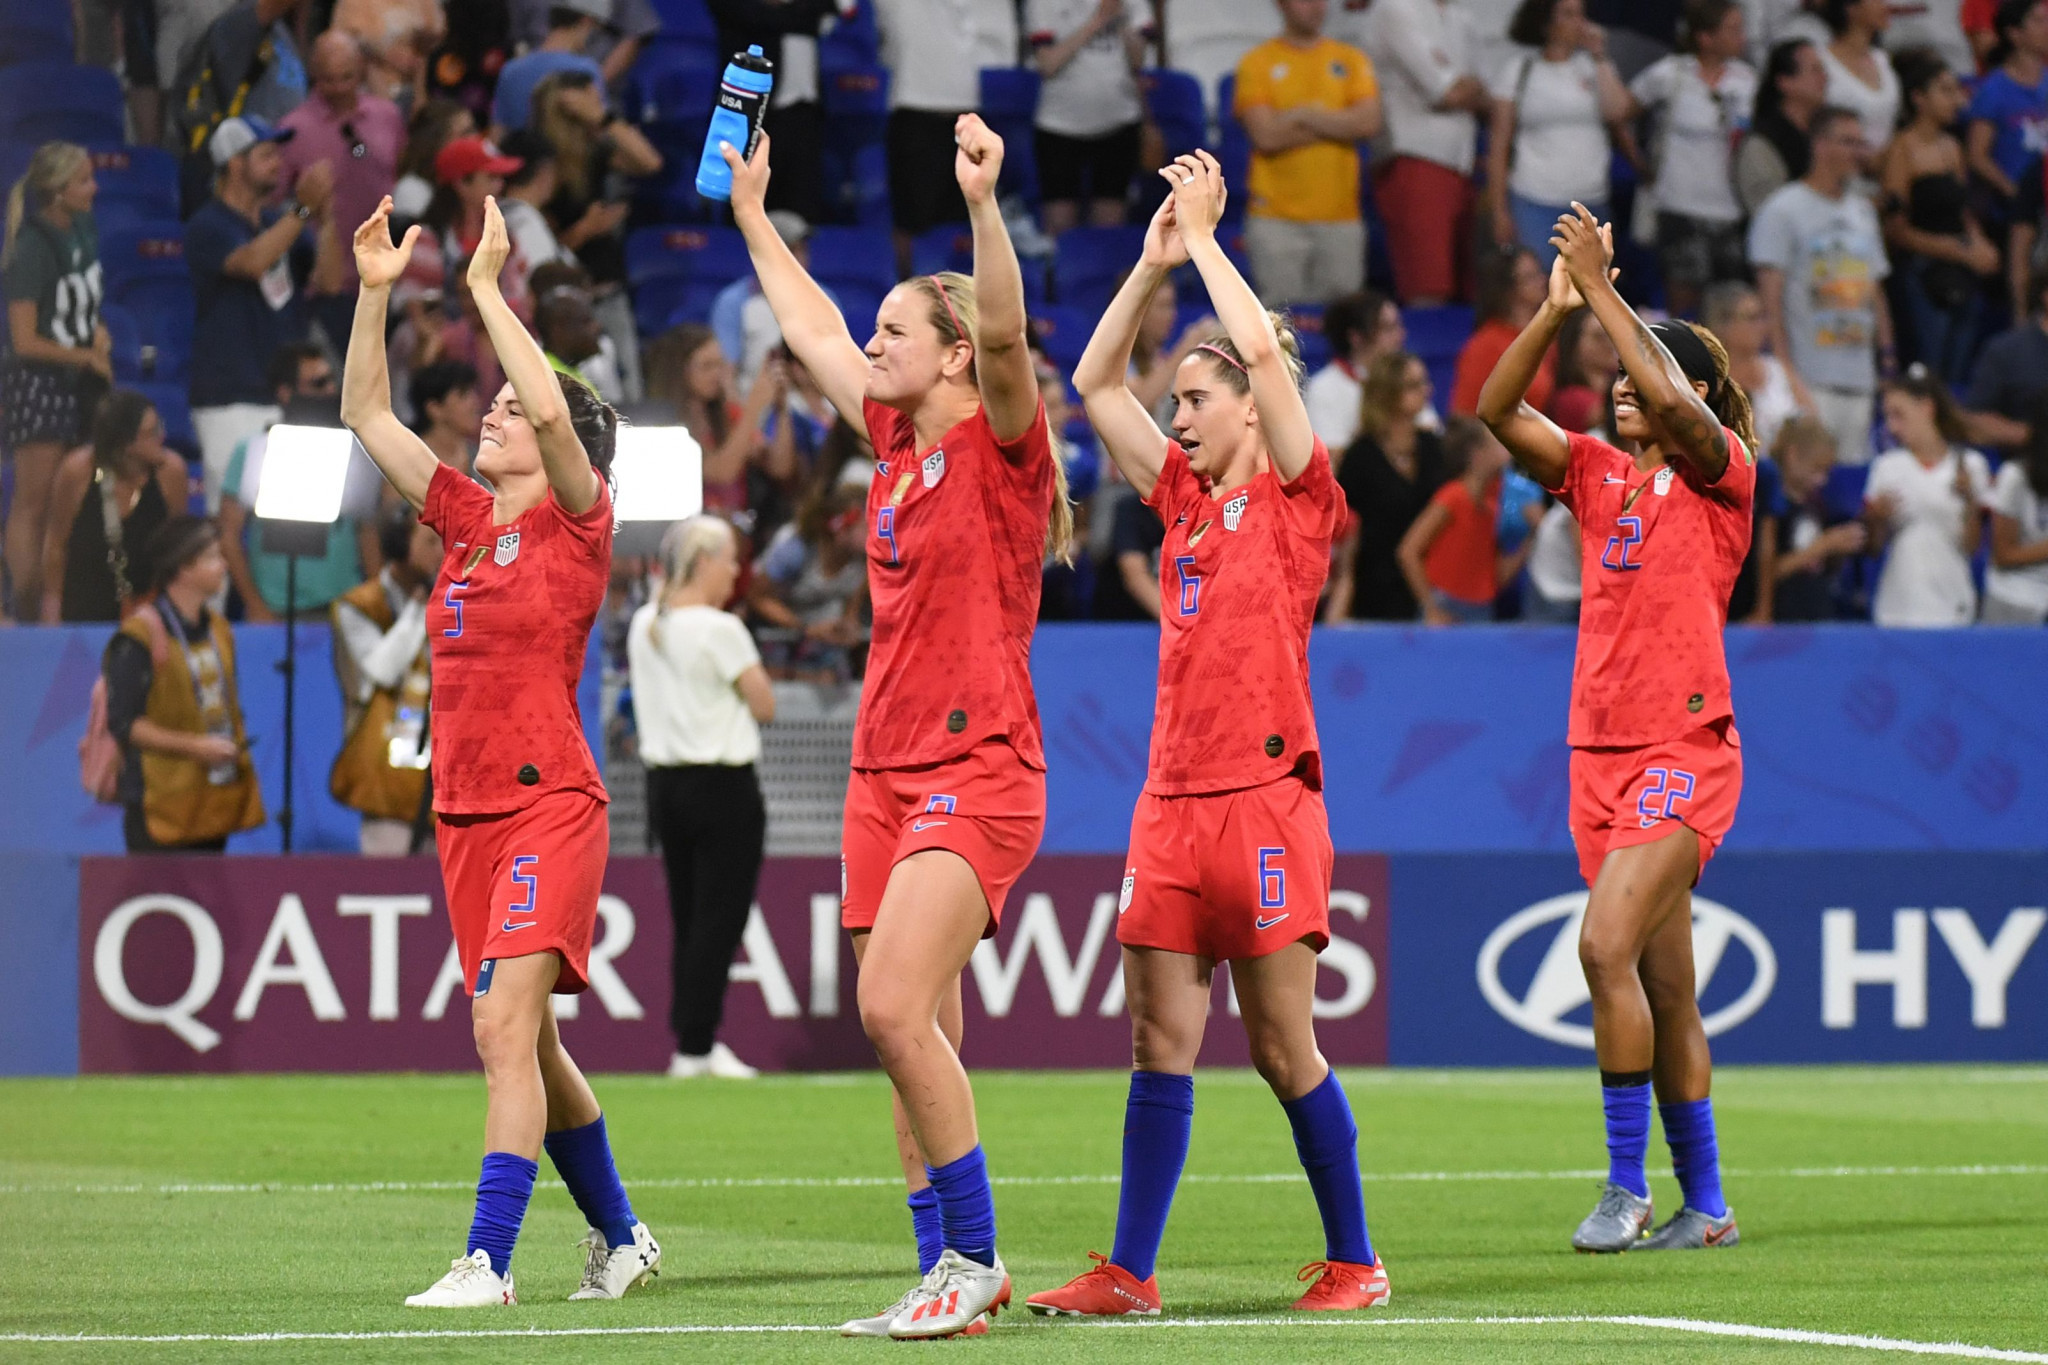 Morgan sends United States through to Women's World Cup final 